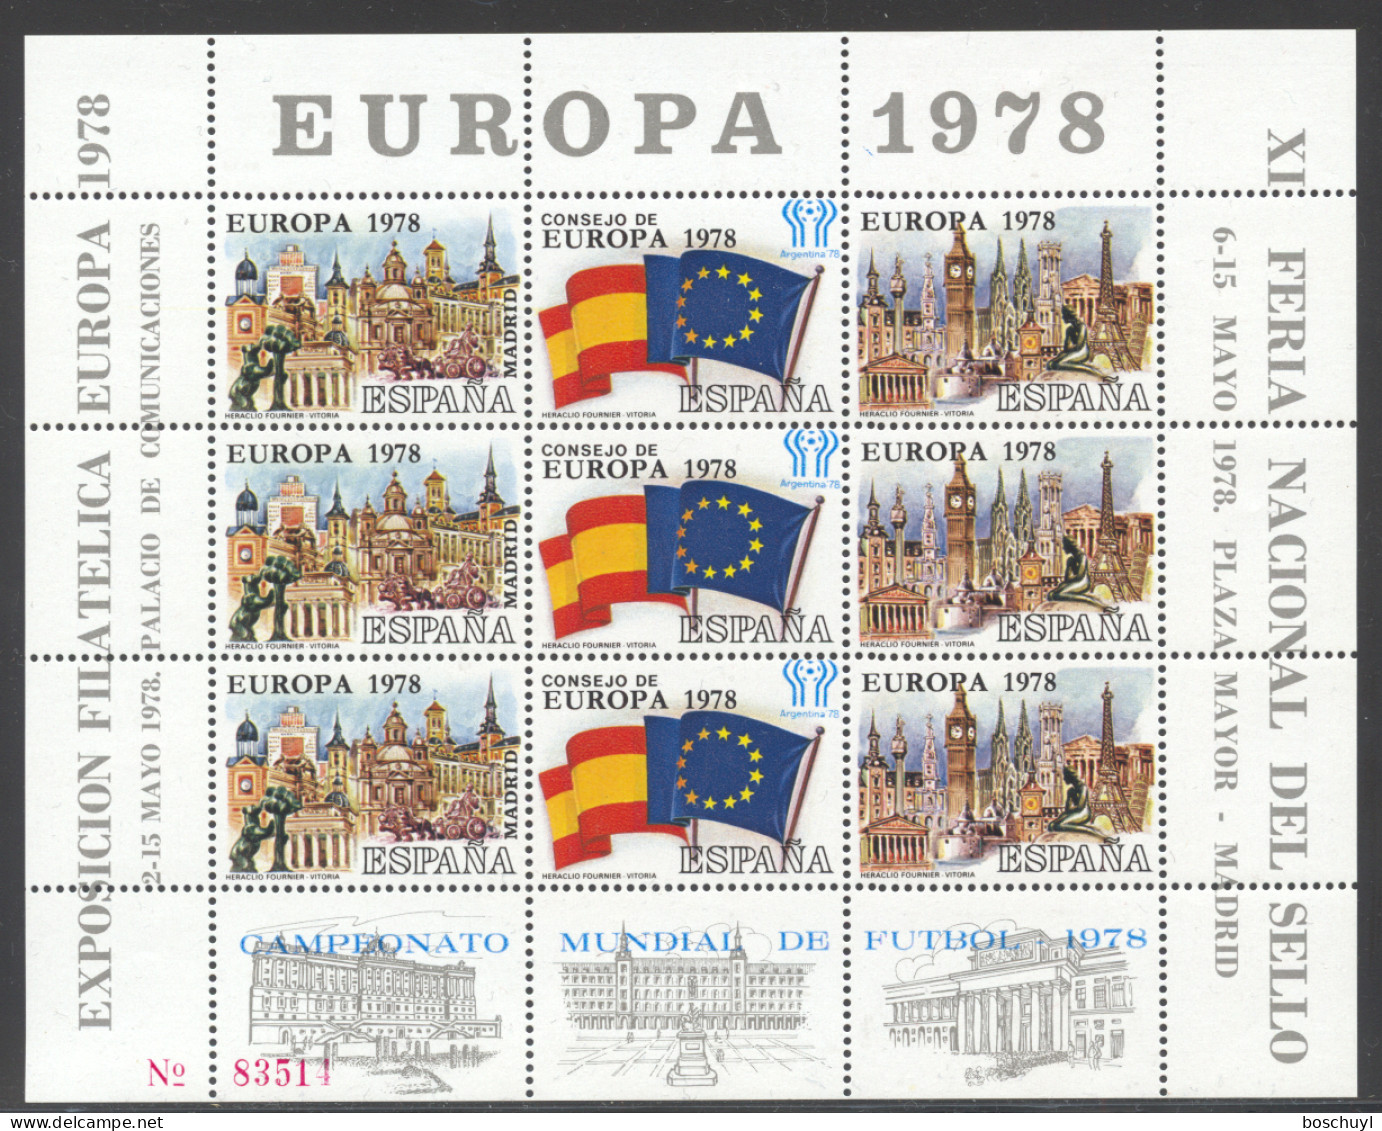 Spain, 1978, Soccer World Cup Argentina, Football, Sports, European Council, Flags, Exhibition Cinderella, MNH - Herdenkingsblaadjes